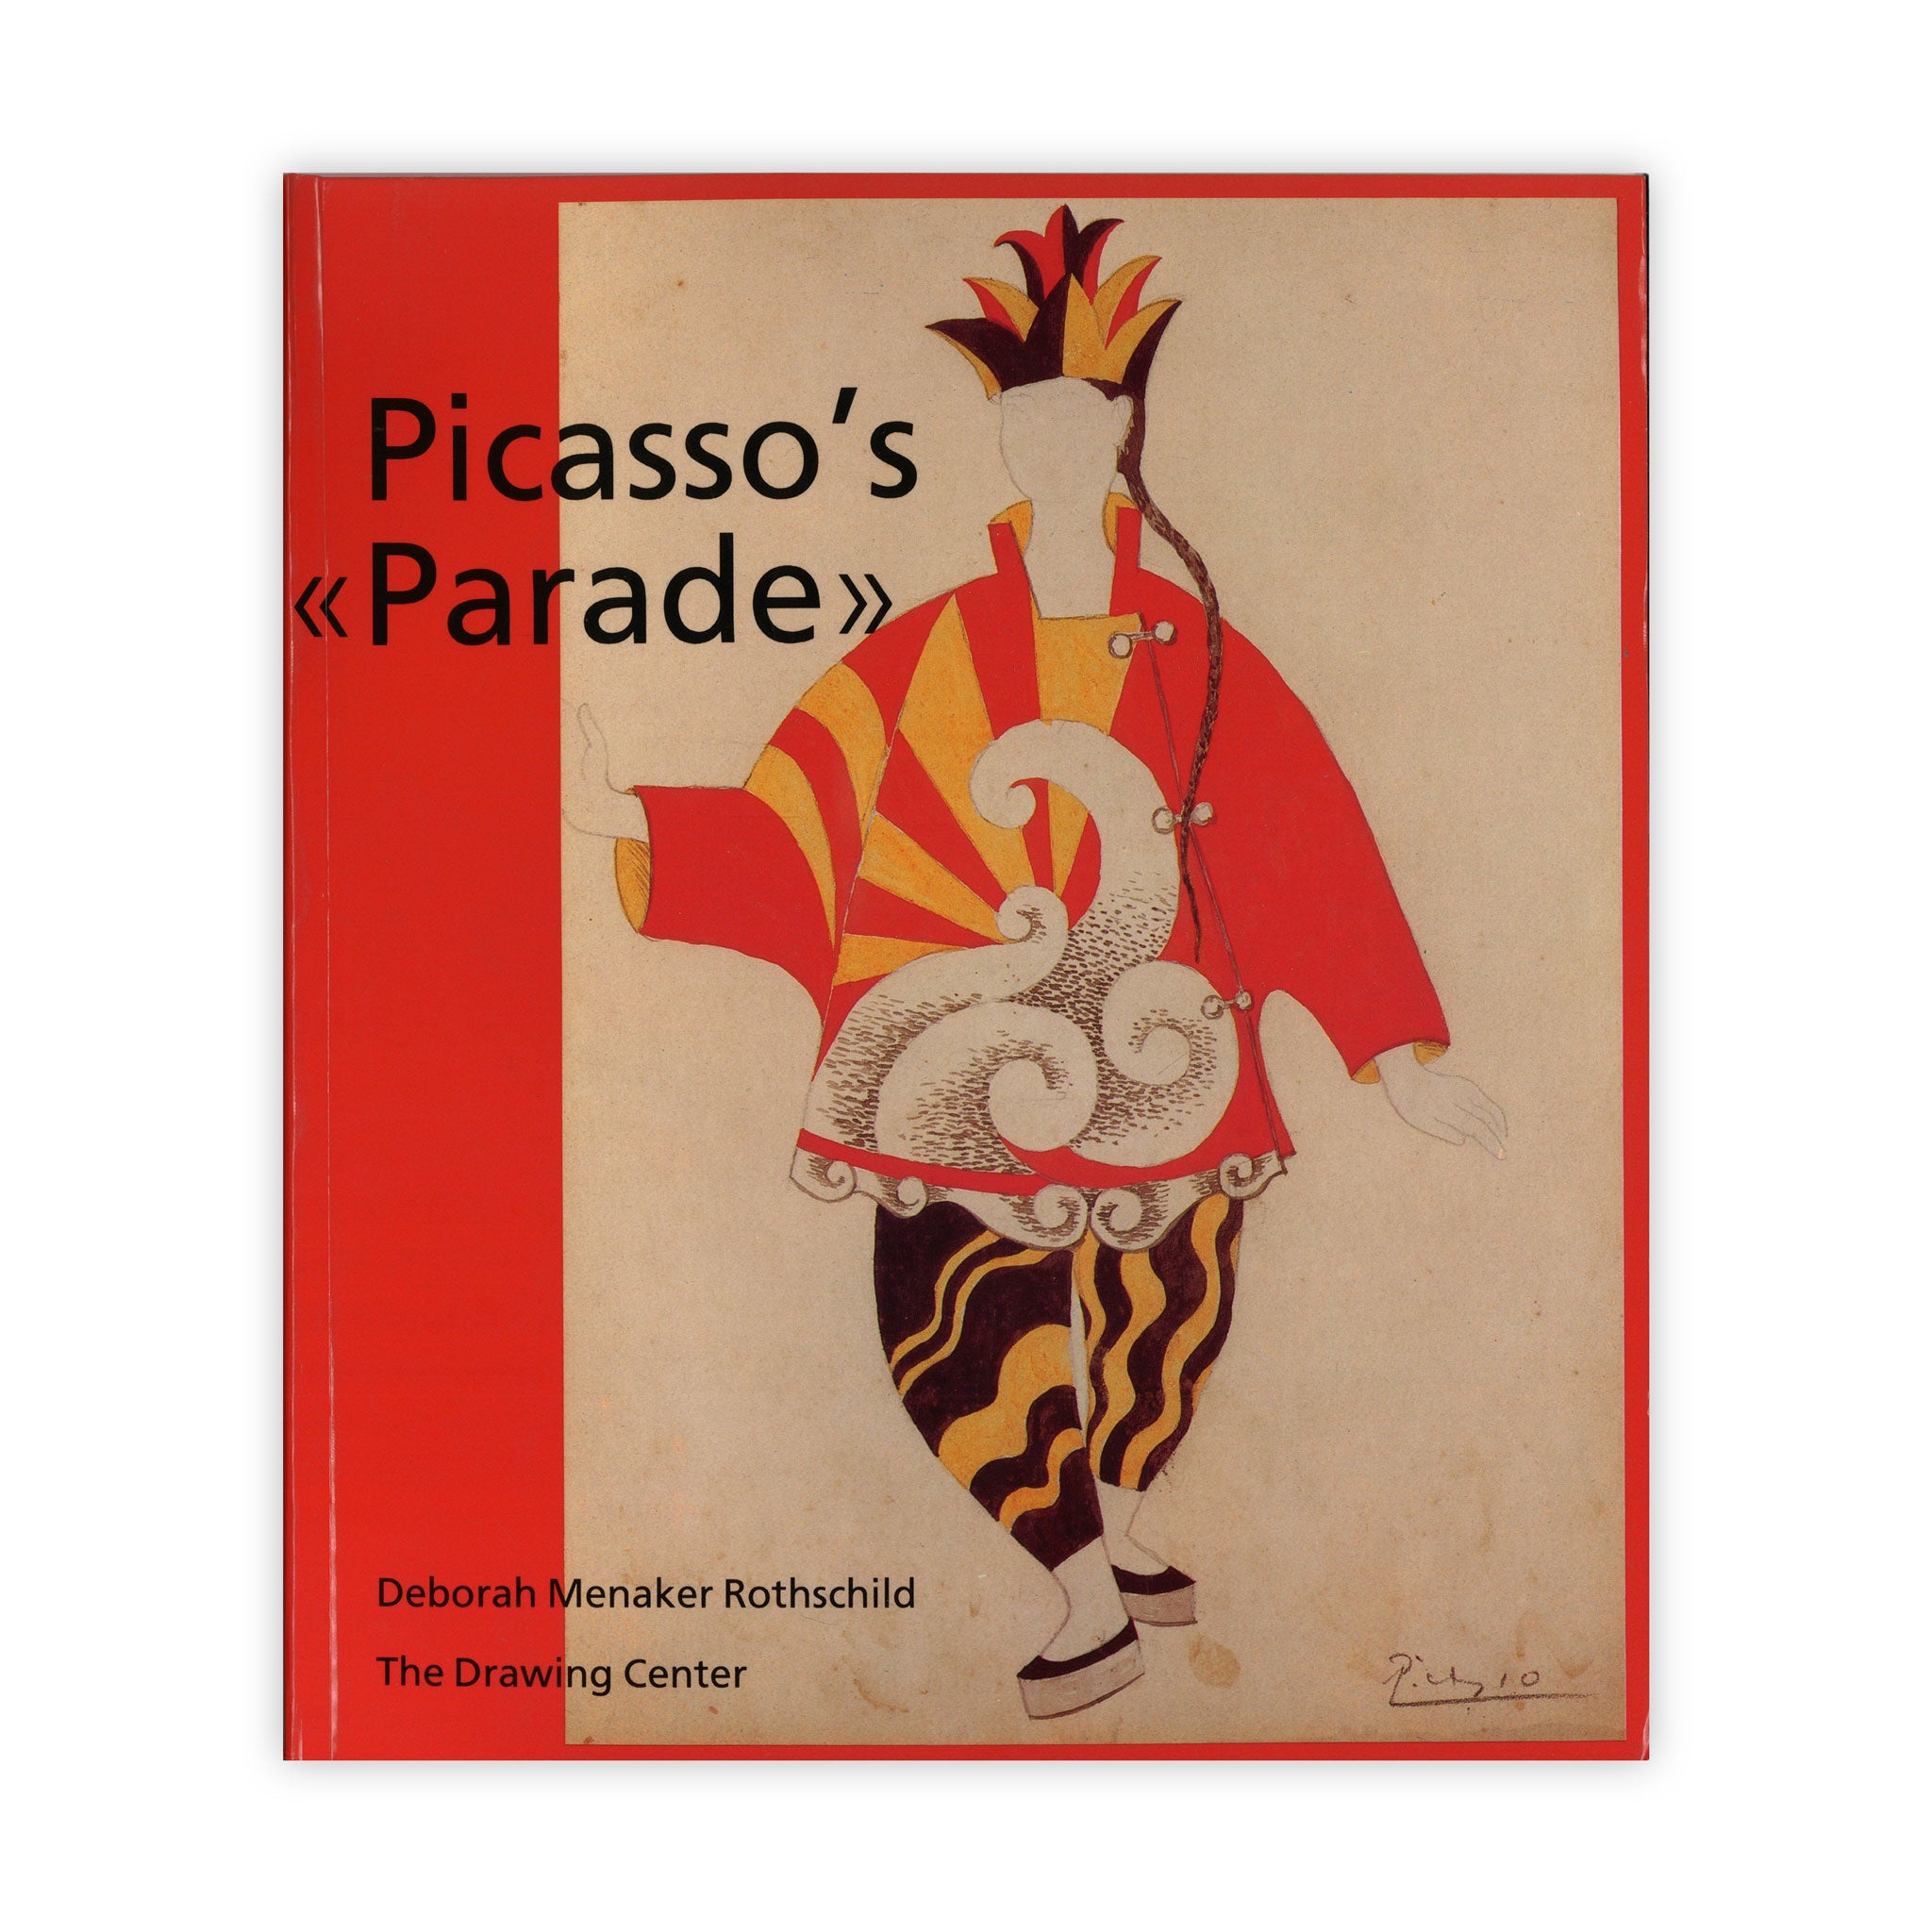 Front cover of "Picasso's Parade"